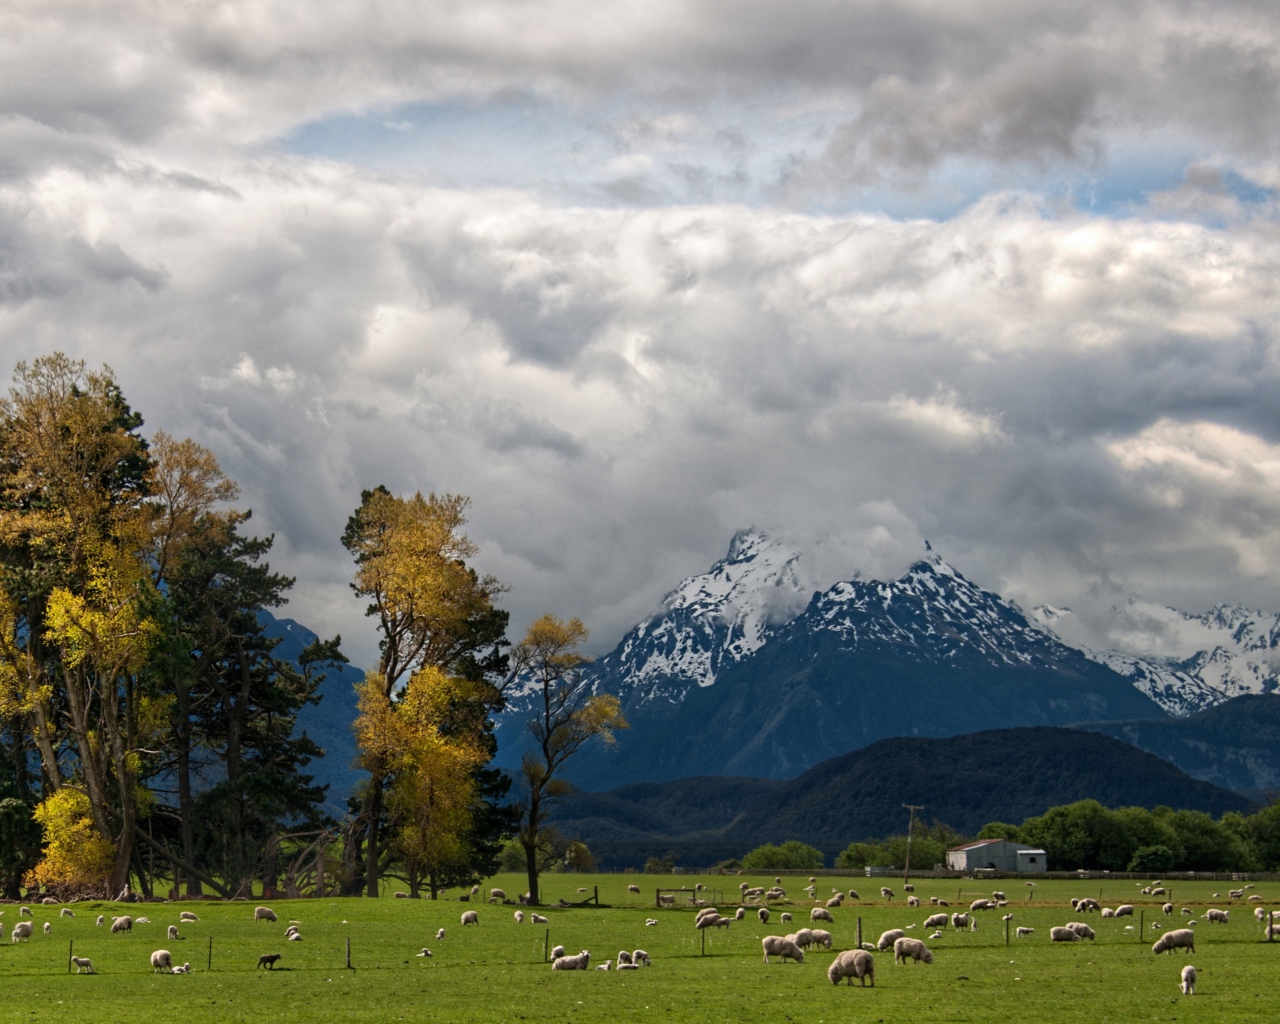 Das Sheeps On Green Field And Mountain View Wallpaper 1280x1024